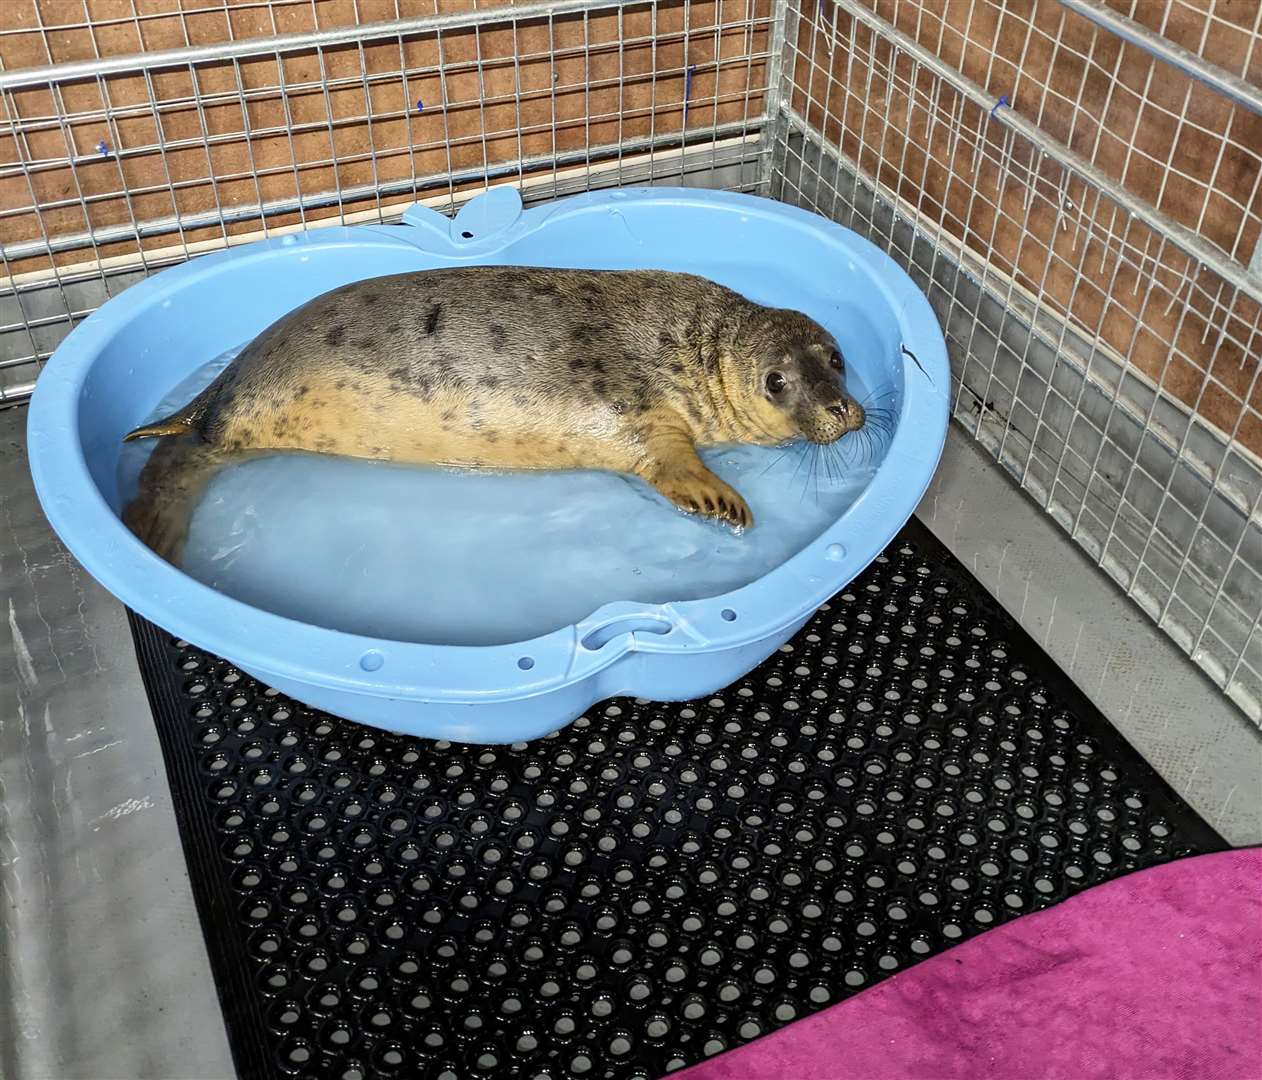 Caithness Seal Rehab and Release helps protect, rescue, treat and release seals along the county’s coastline.